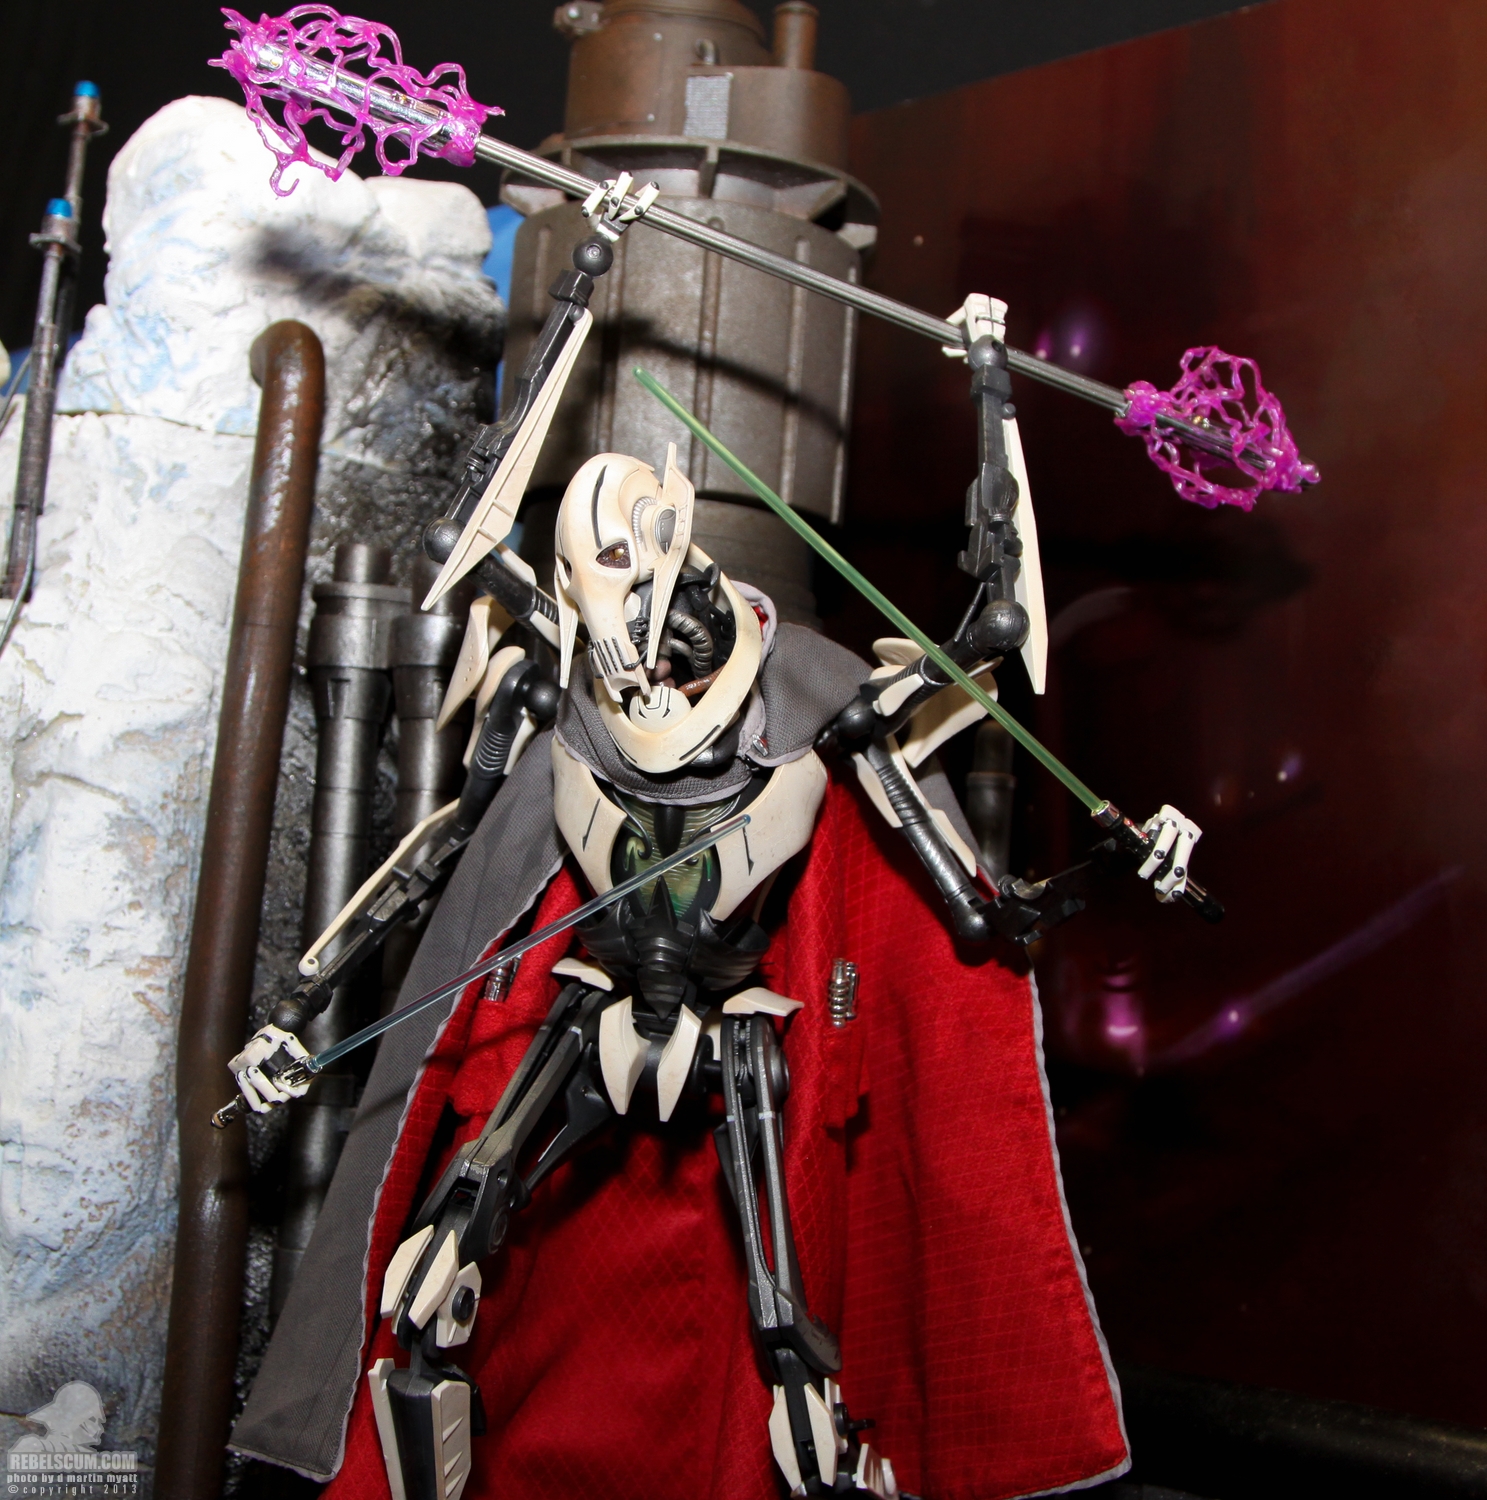 SDCC_2013_Sideshow_Collectibles_Star_Wars_Wed-036.jpg